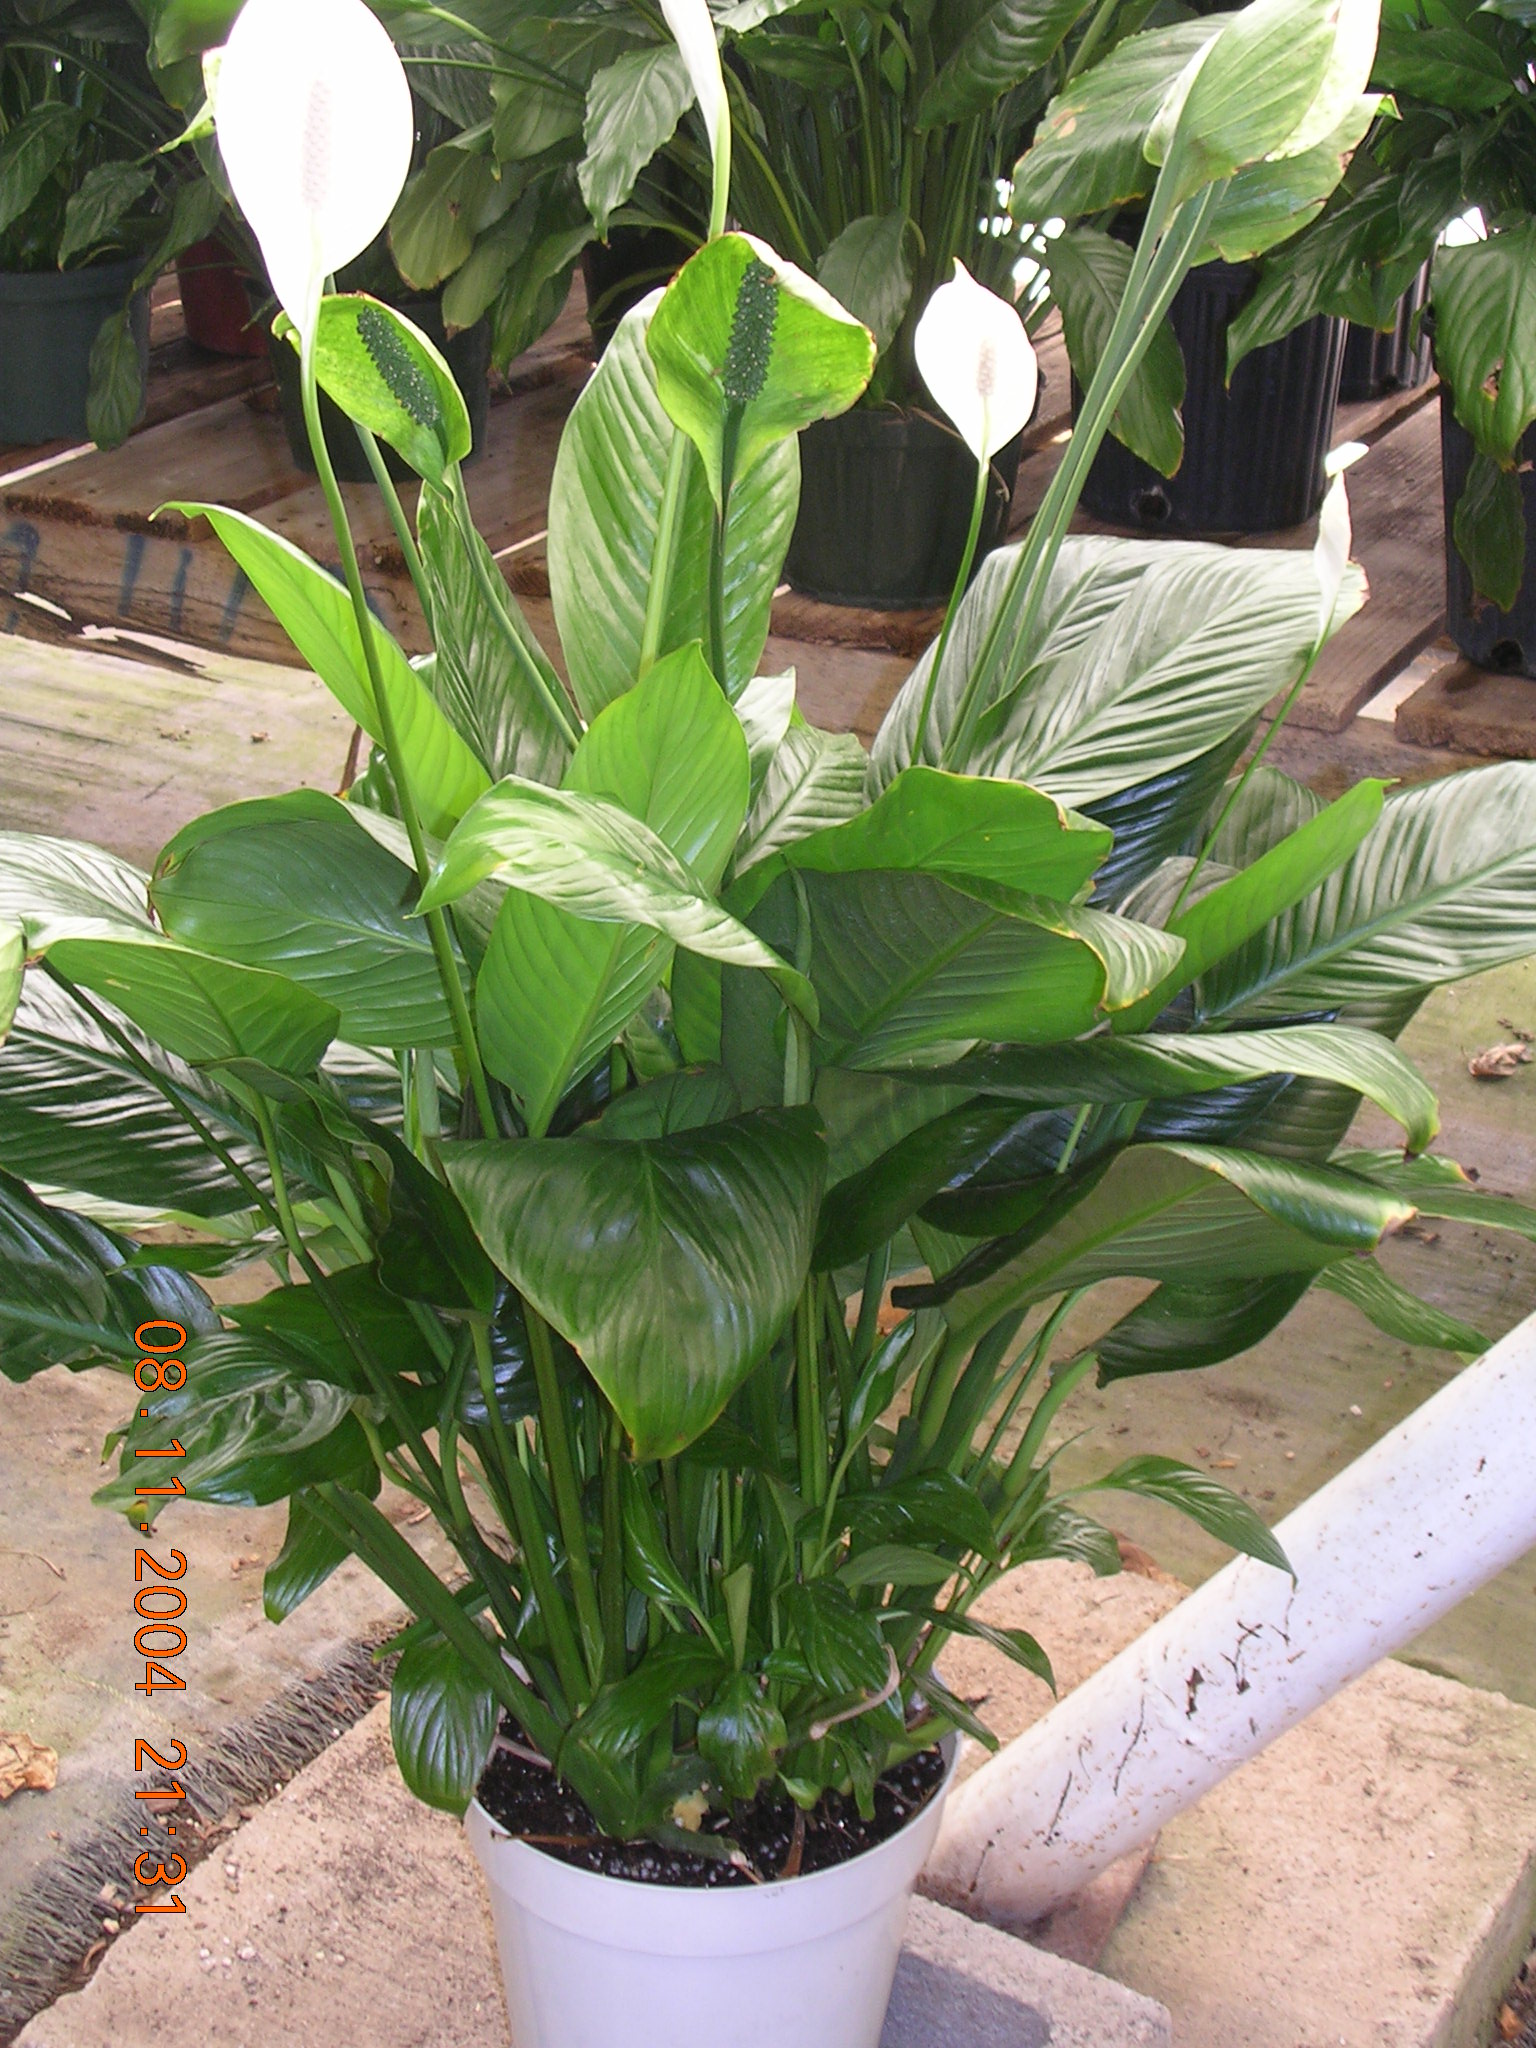 For tropical plants or other plant delivery Phoenix Plants delivers